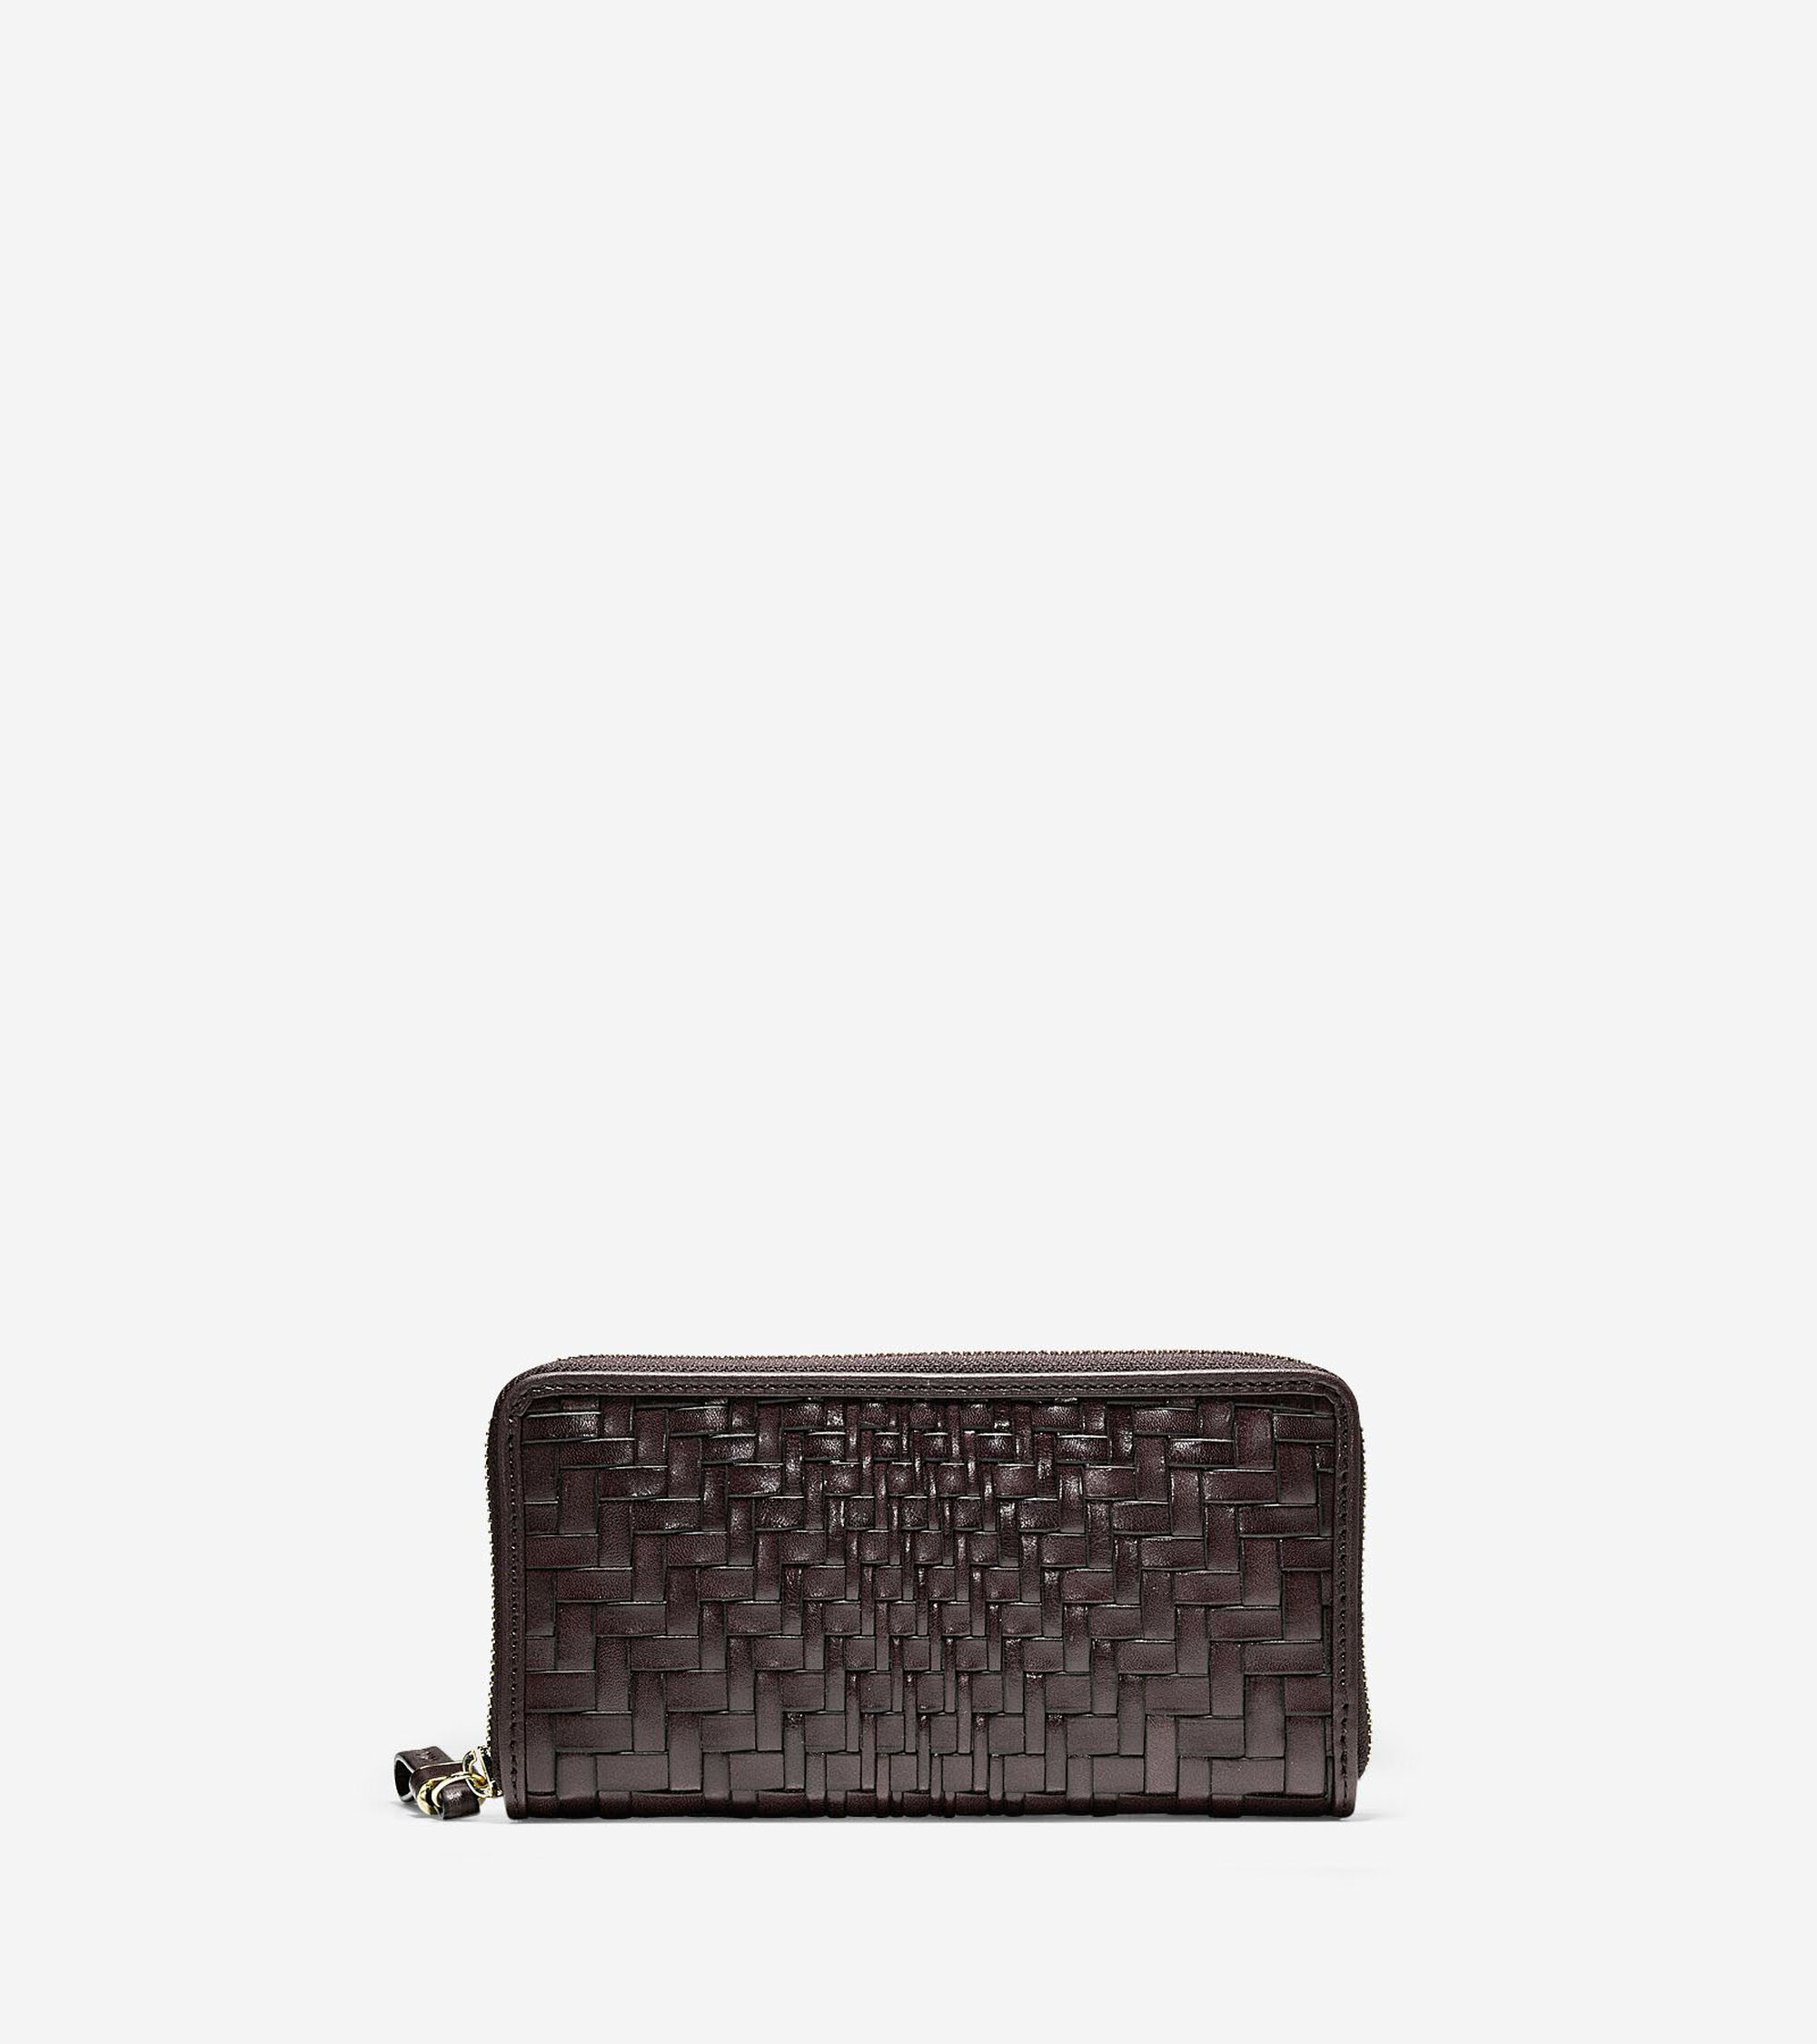 Genevieve Large Continental Wallet in Chocolate | Cole Haan